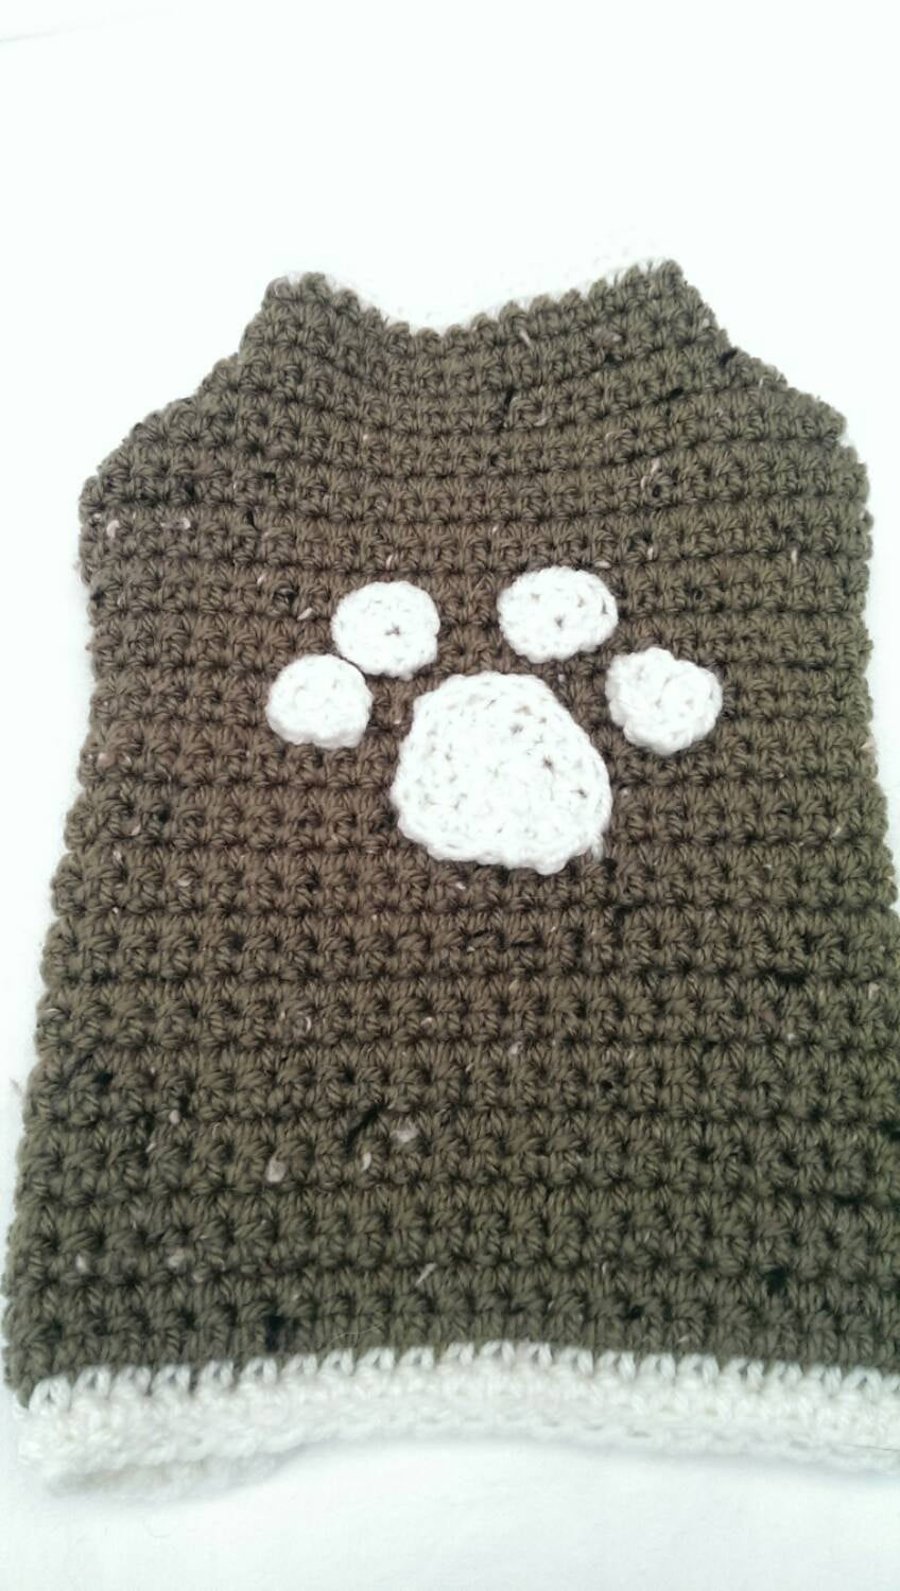 Green and cream trim dog sweater with paw print applique for small sized dog